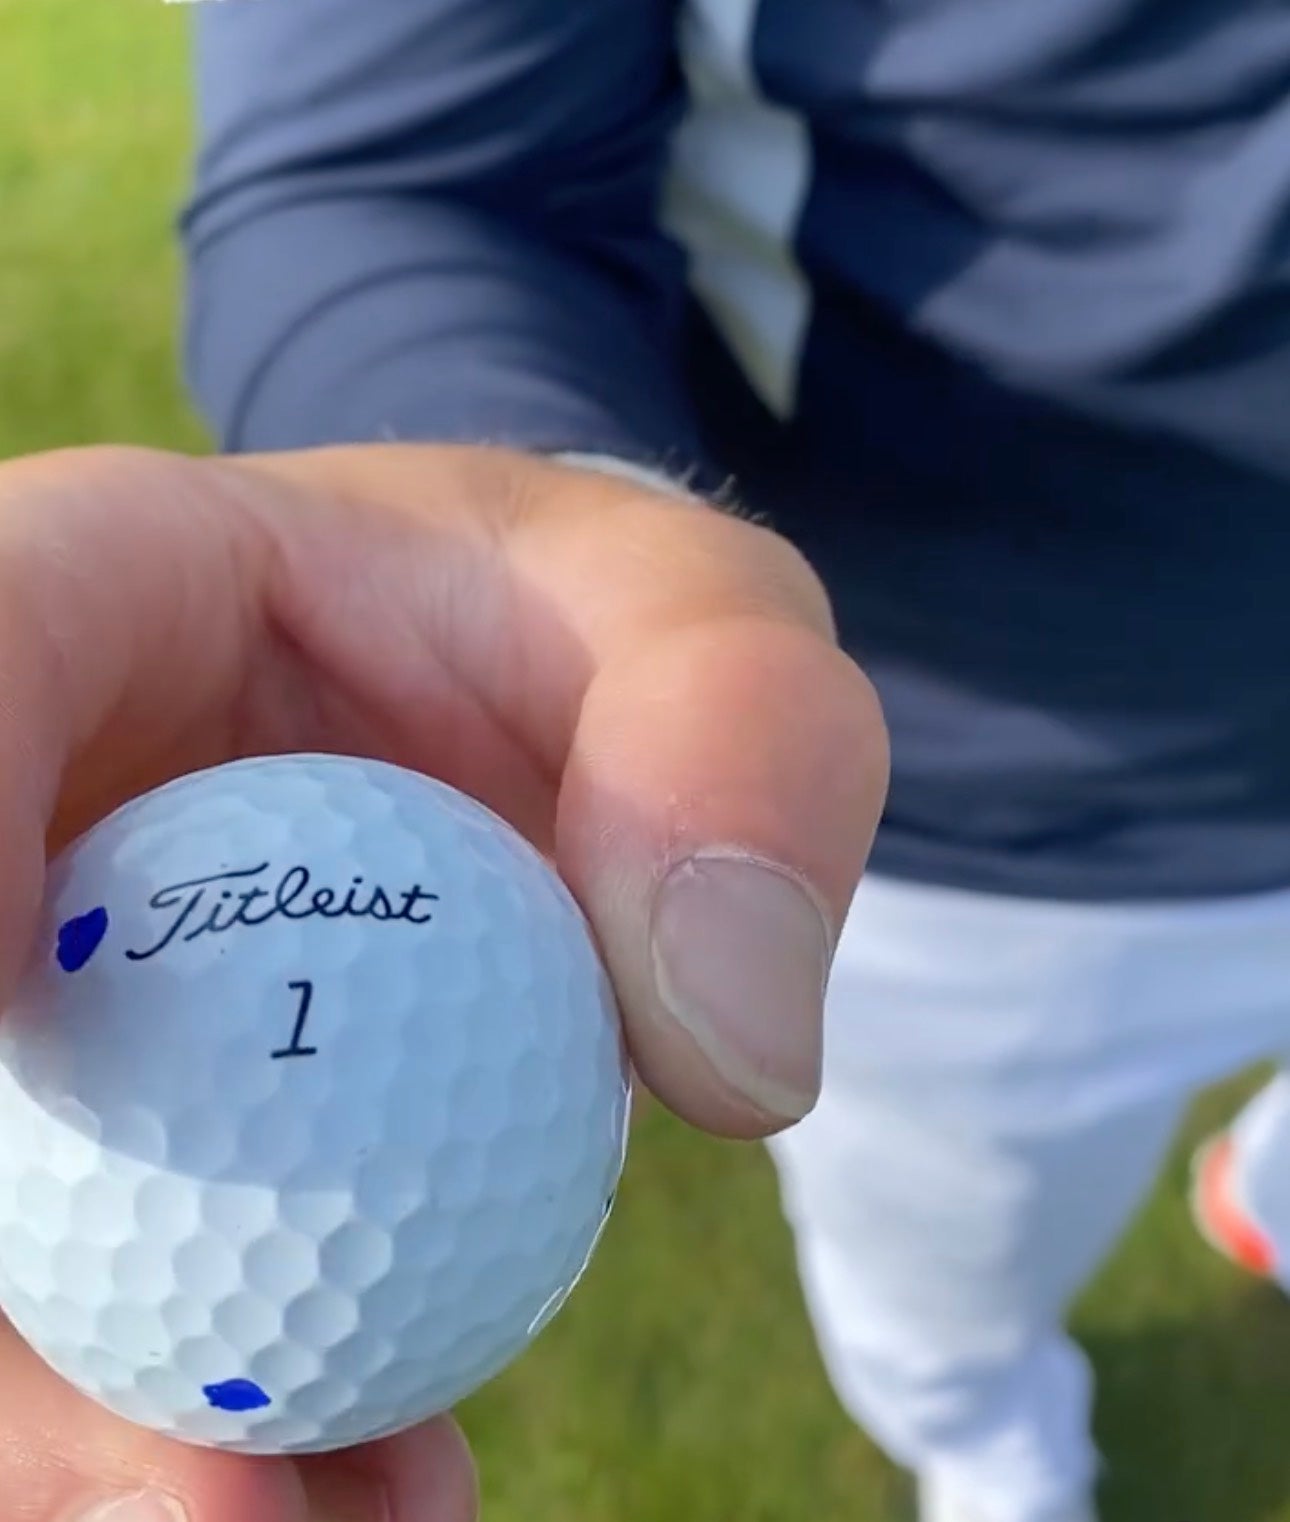 This clever way of marking your golf ball can improve your focus and swing